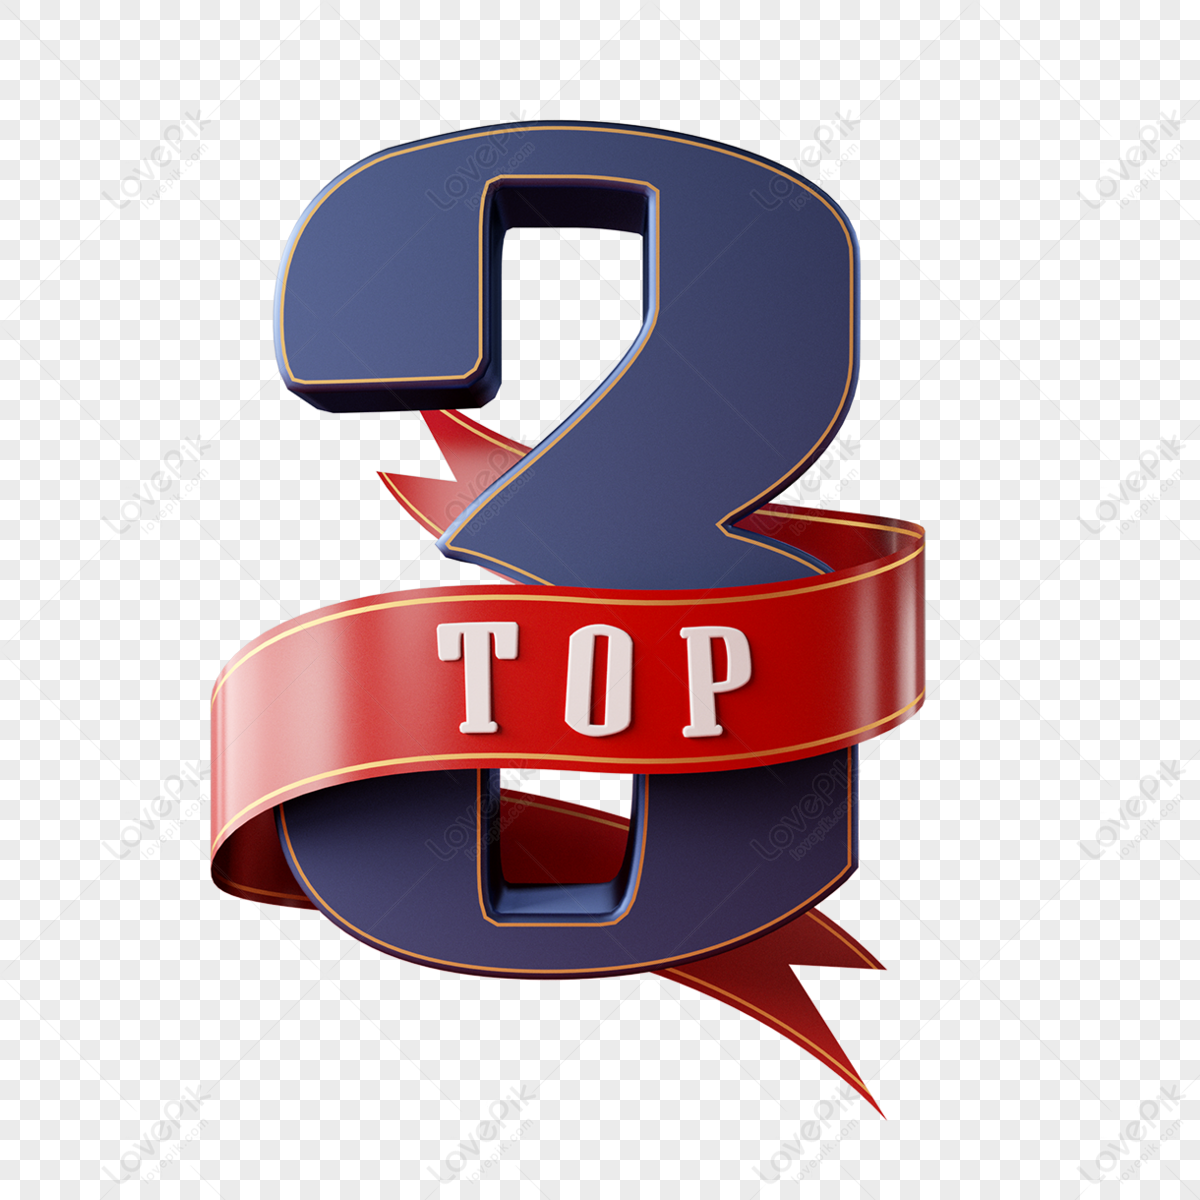 Top 10 Ranking PNG Images With Transparent Background